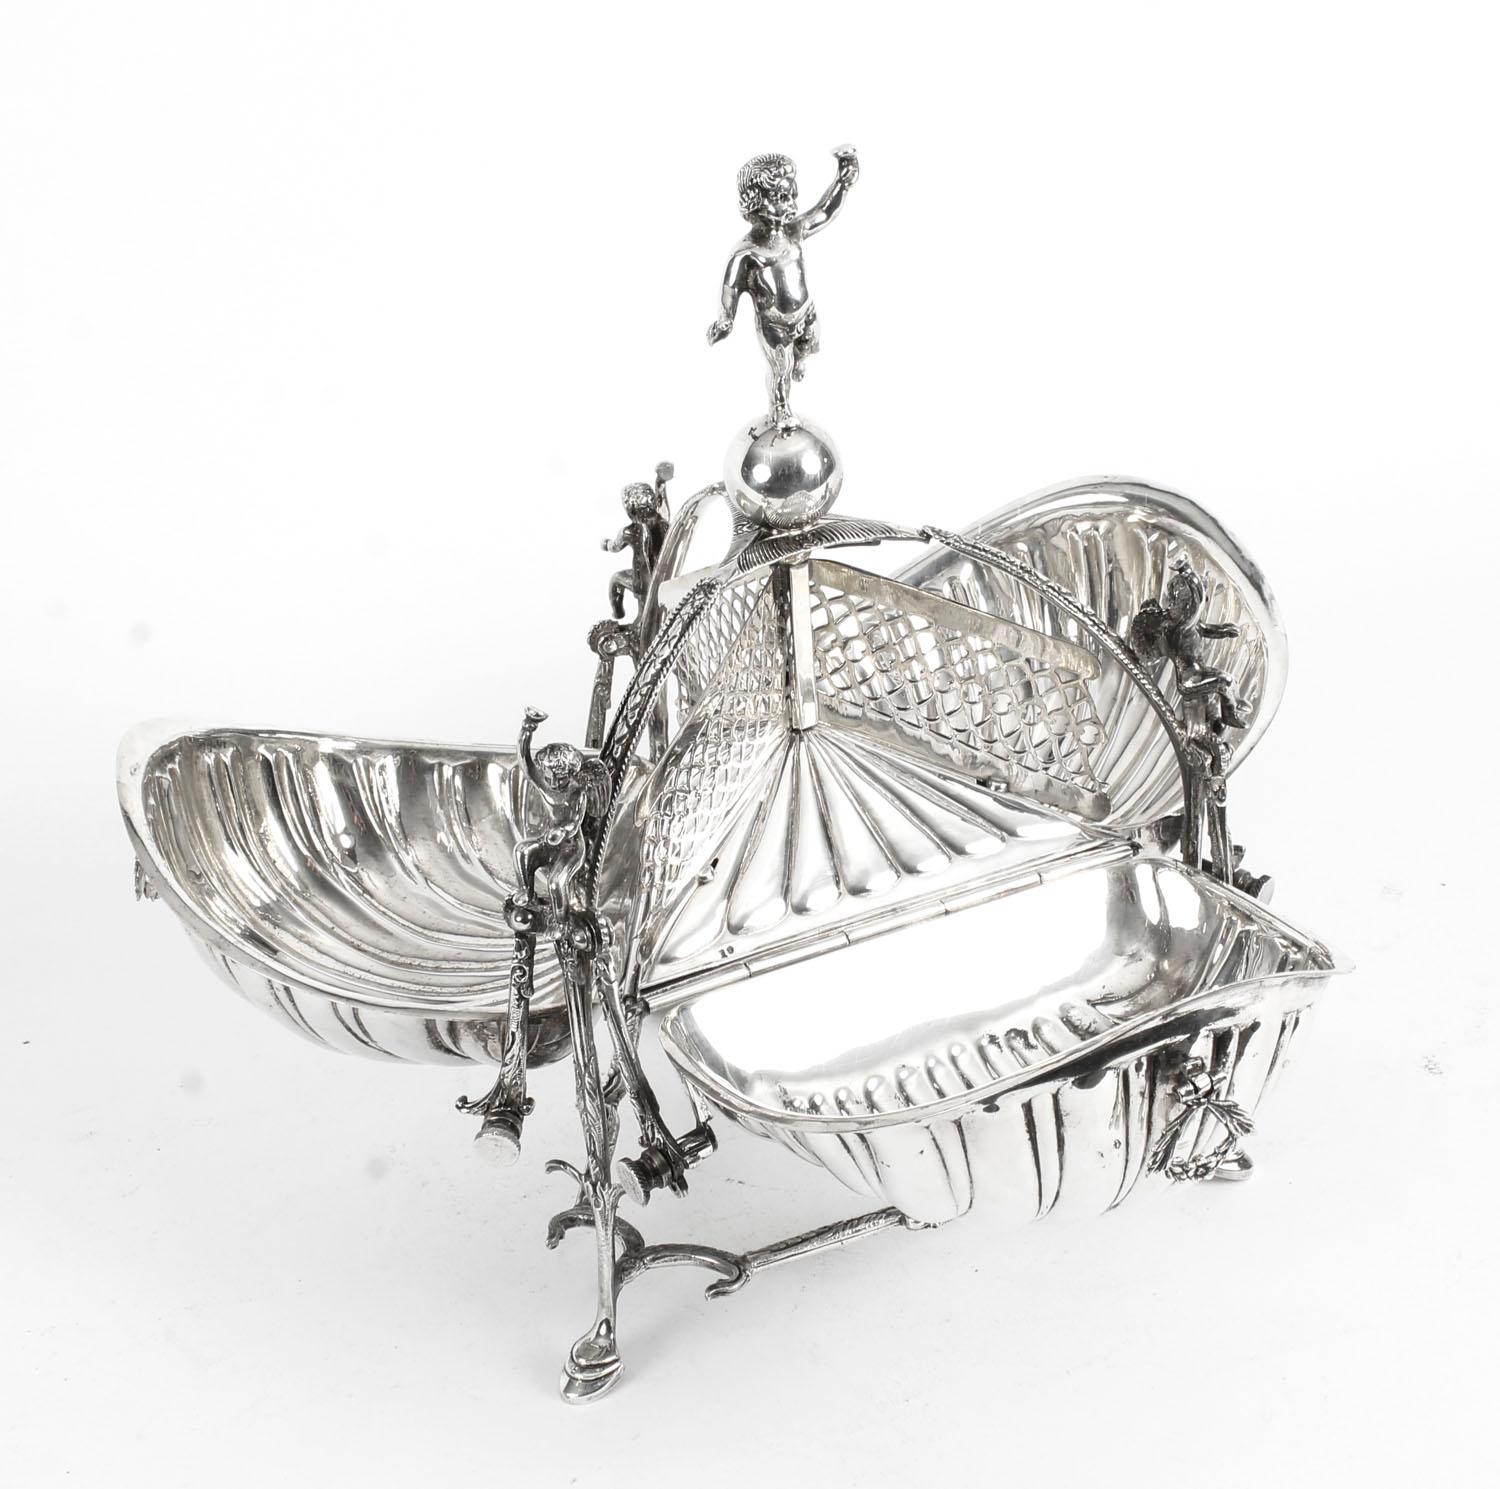 This is a beautiful antique triple shell shaped silver plated biscuit box, circa 1900 in date.

It bears the makers mark KR&S with a crown.

Producing this gorgeous piece over tea would be certain to raise a few eyebrows. You could use it to